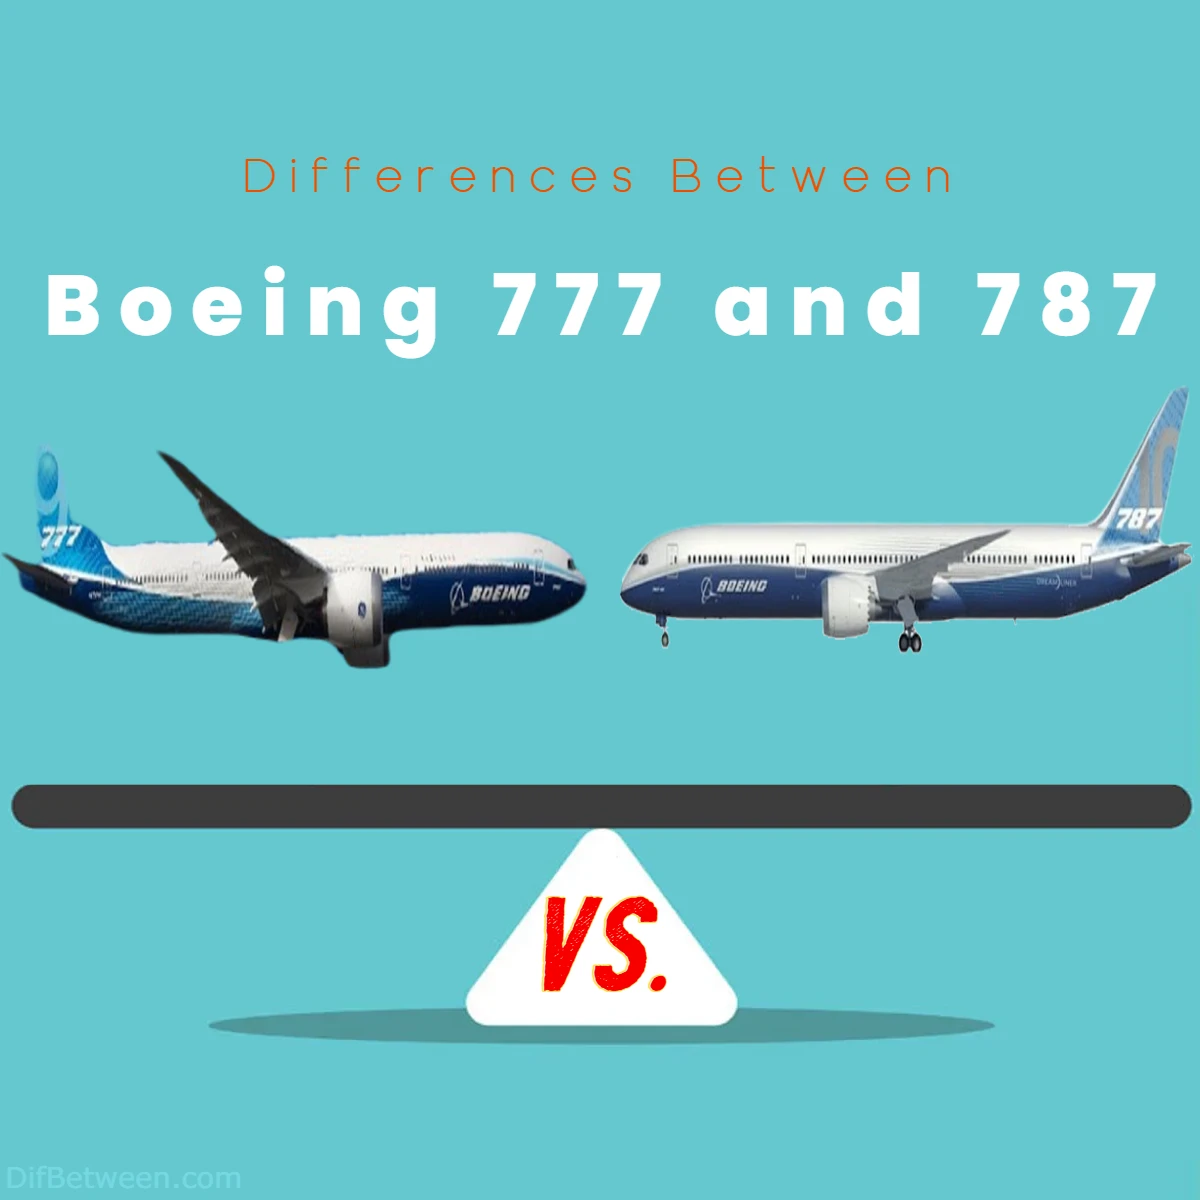 Difference Between Boeing 787 and 777